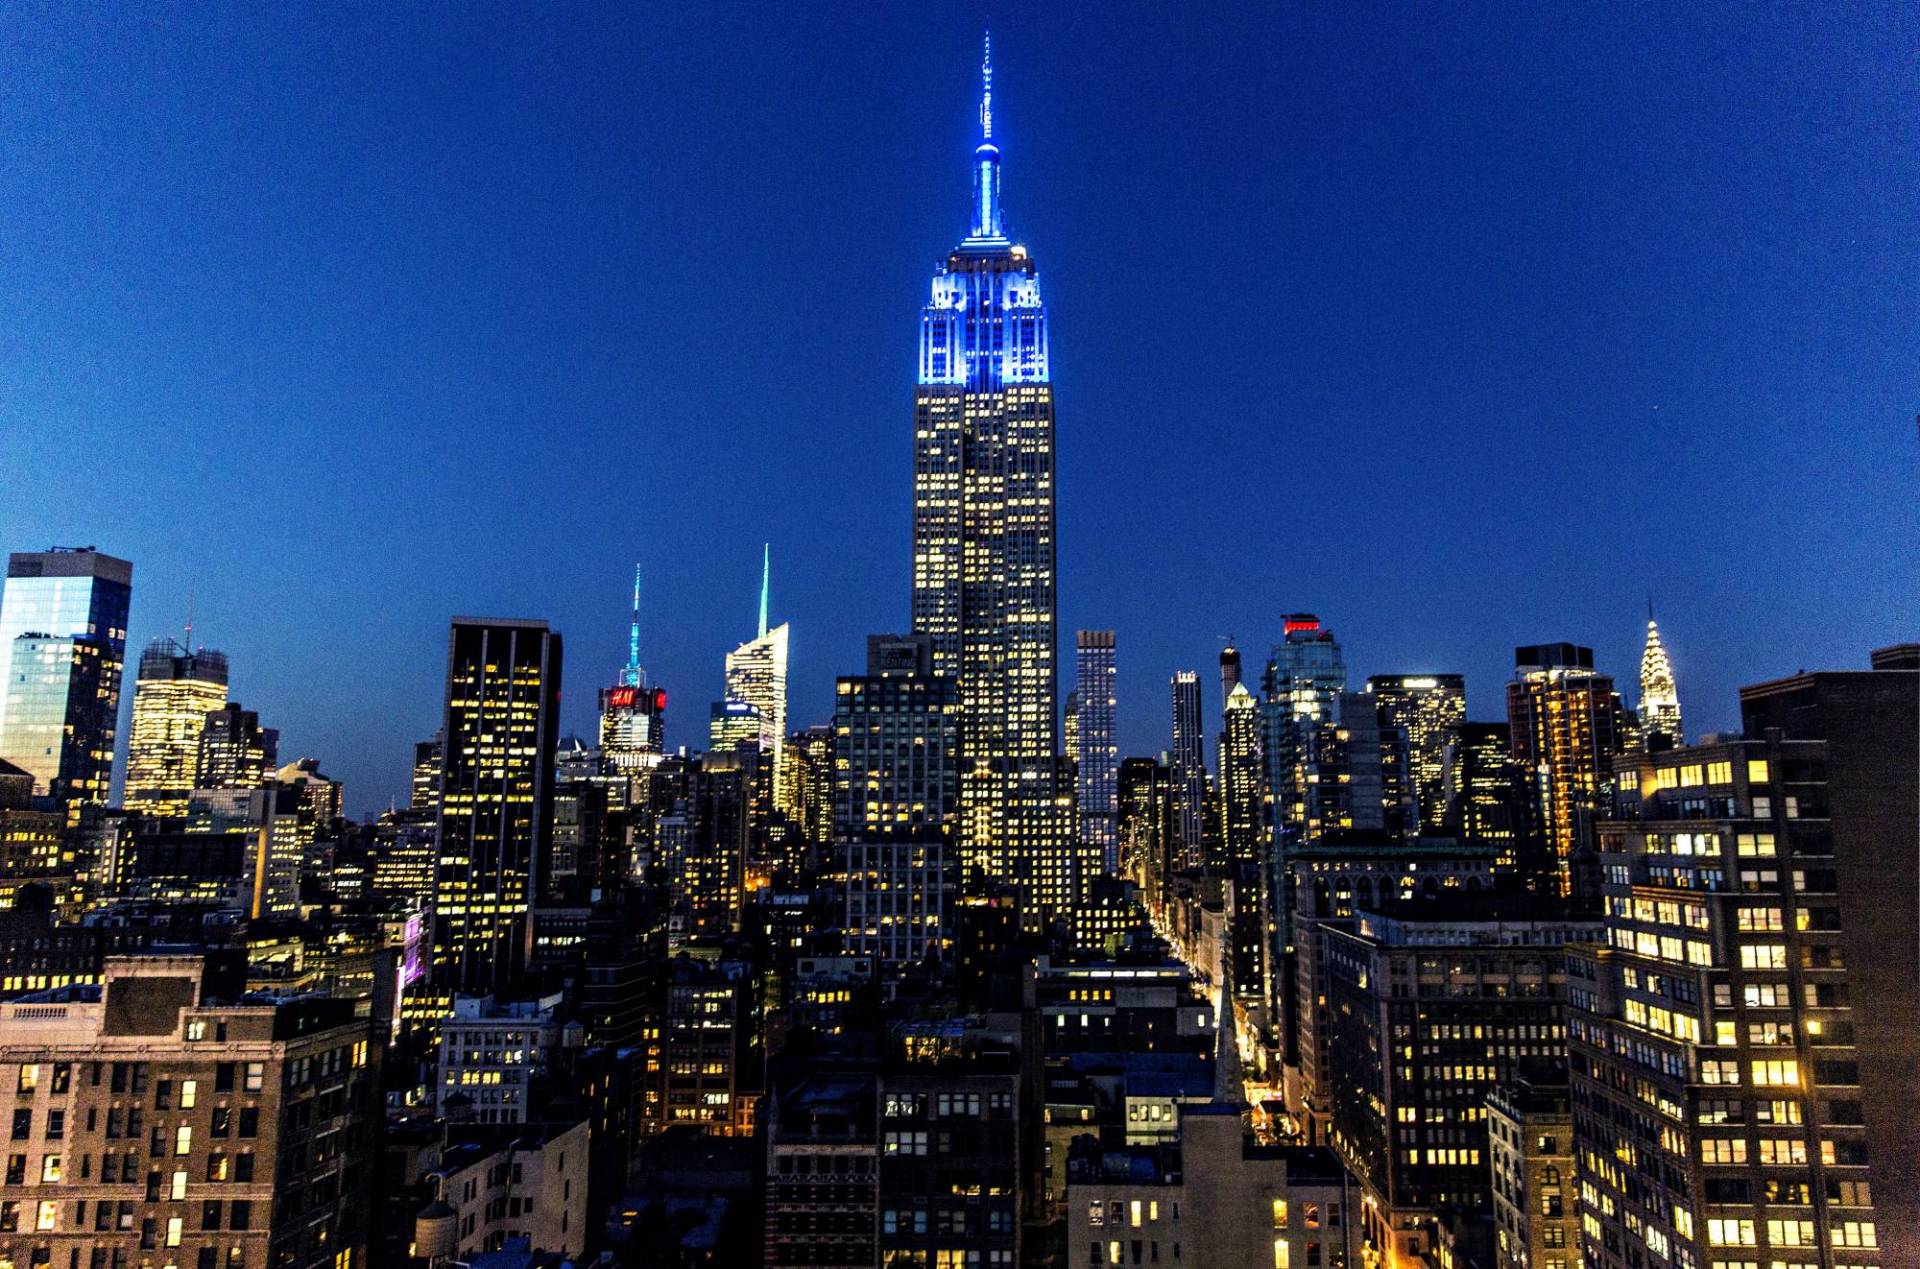 Empire State Building lit up in blue.